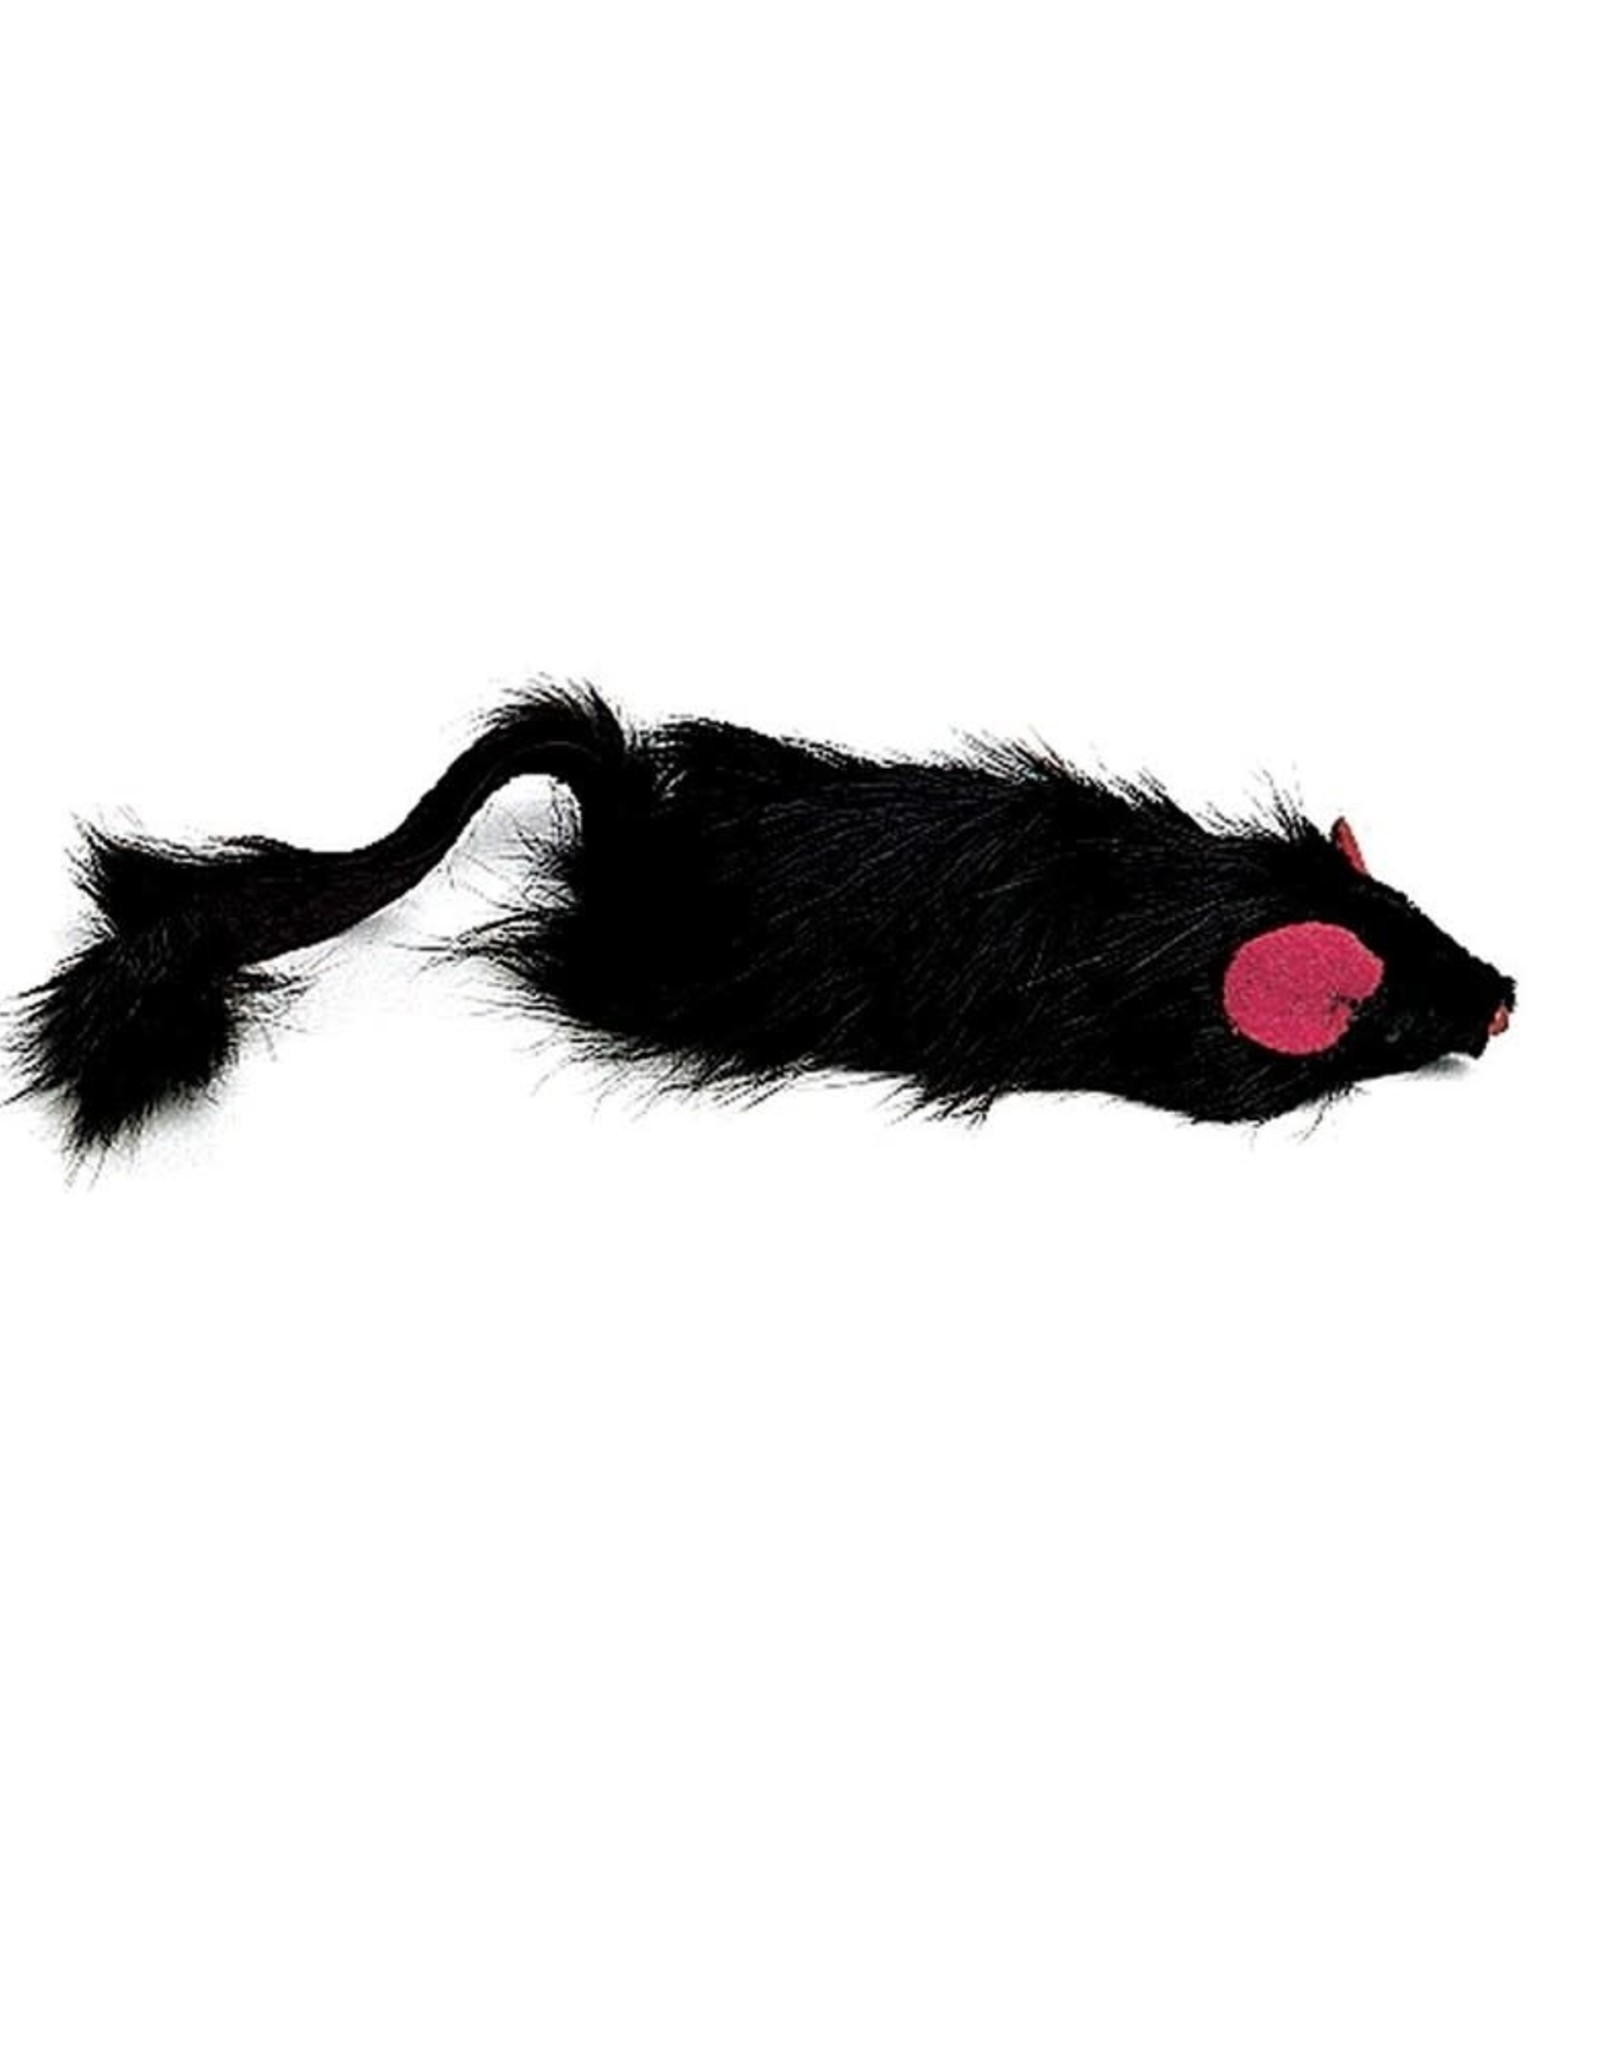 ETHICAL PRODUCT INC Ethical Products Spot Shaggy Plush Ferret Rattle & Catnip Cat Toy